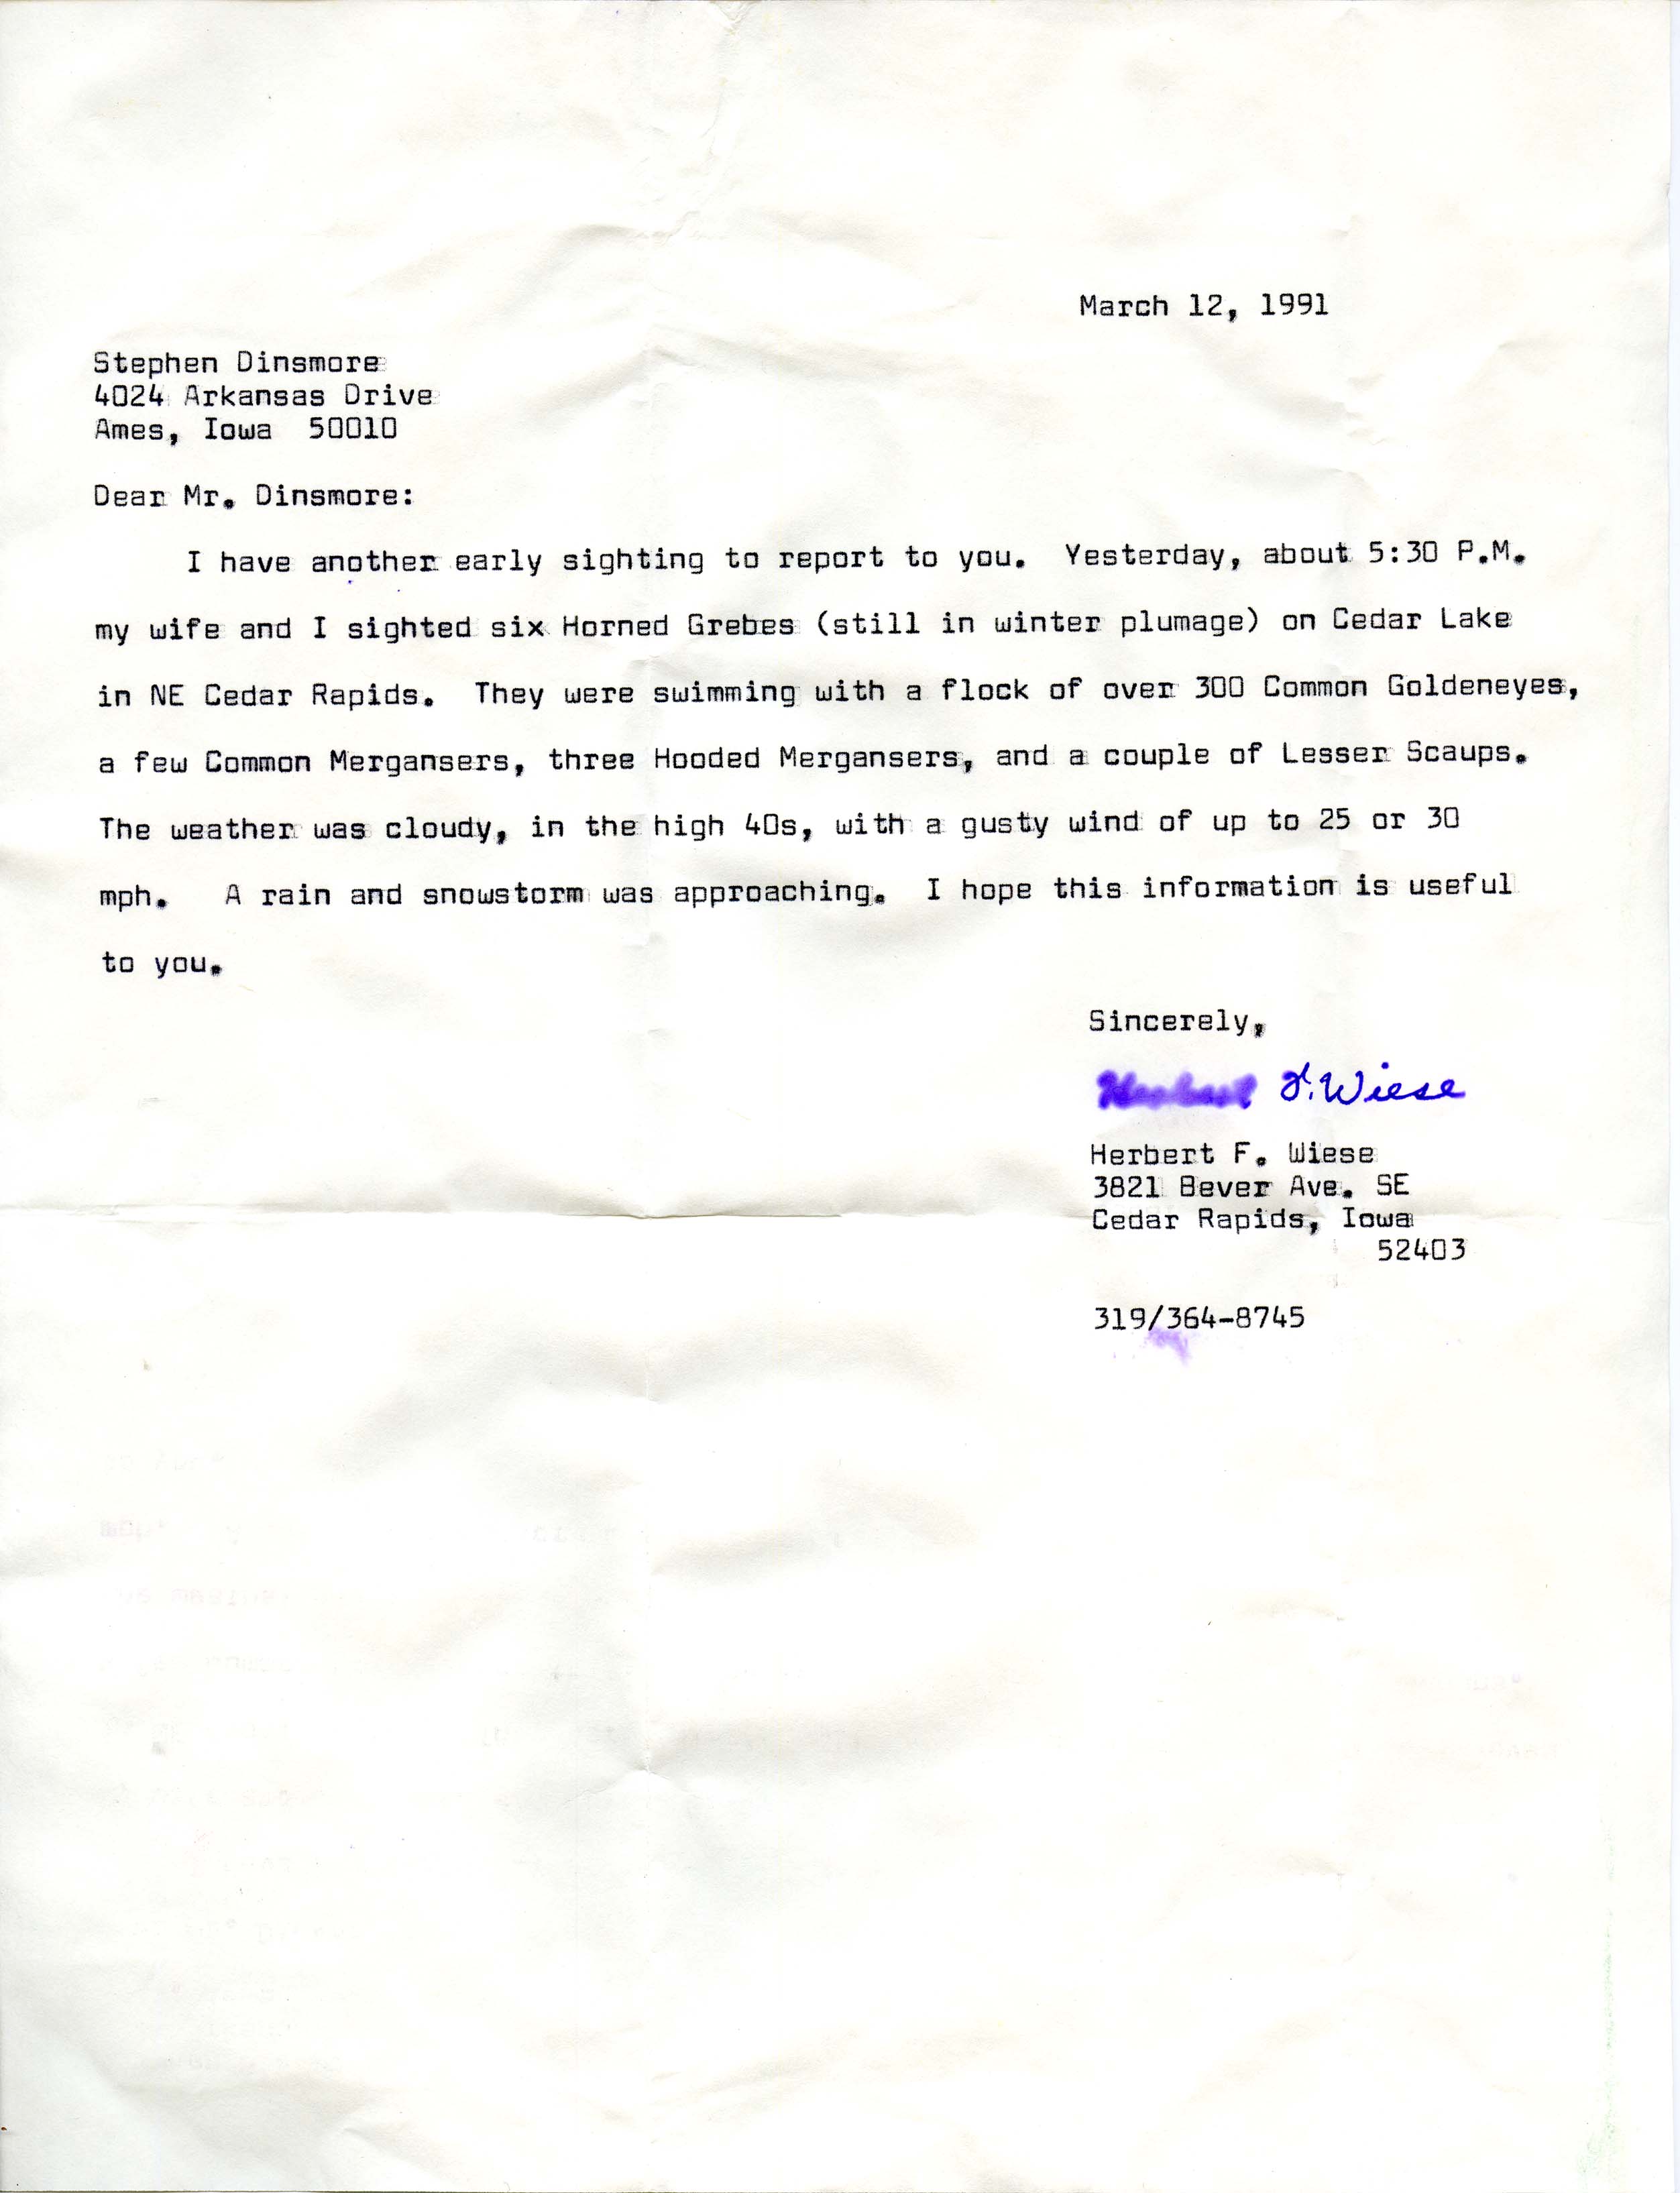 Herbert F. Wiese letter to Stephen Dinsmore regarding bird sightings for IOU quarterly field reports of spring 1991, March 12, 1991